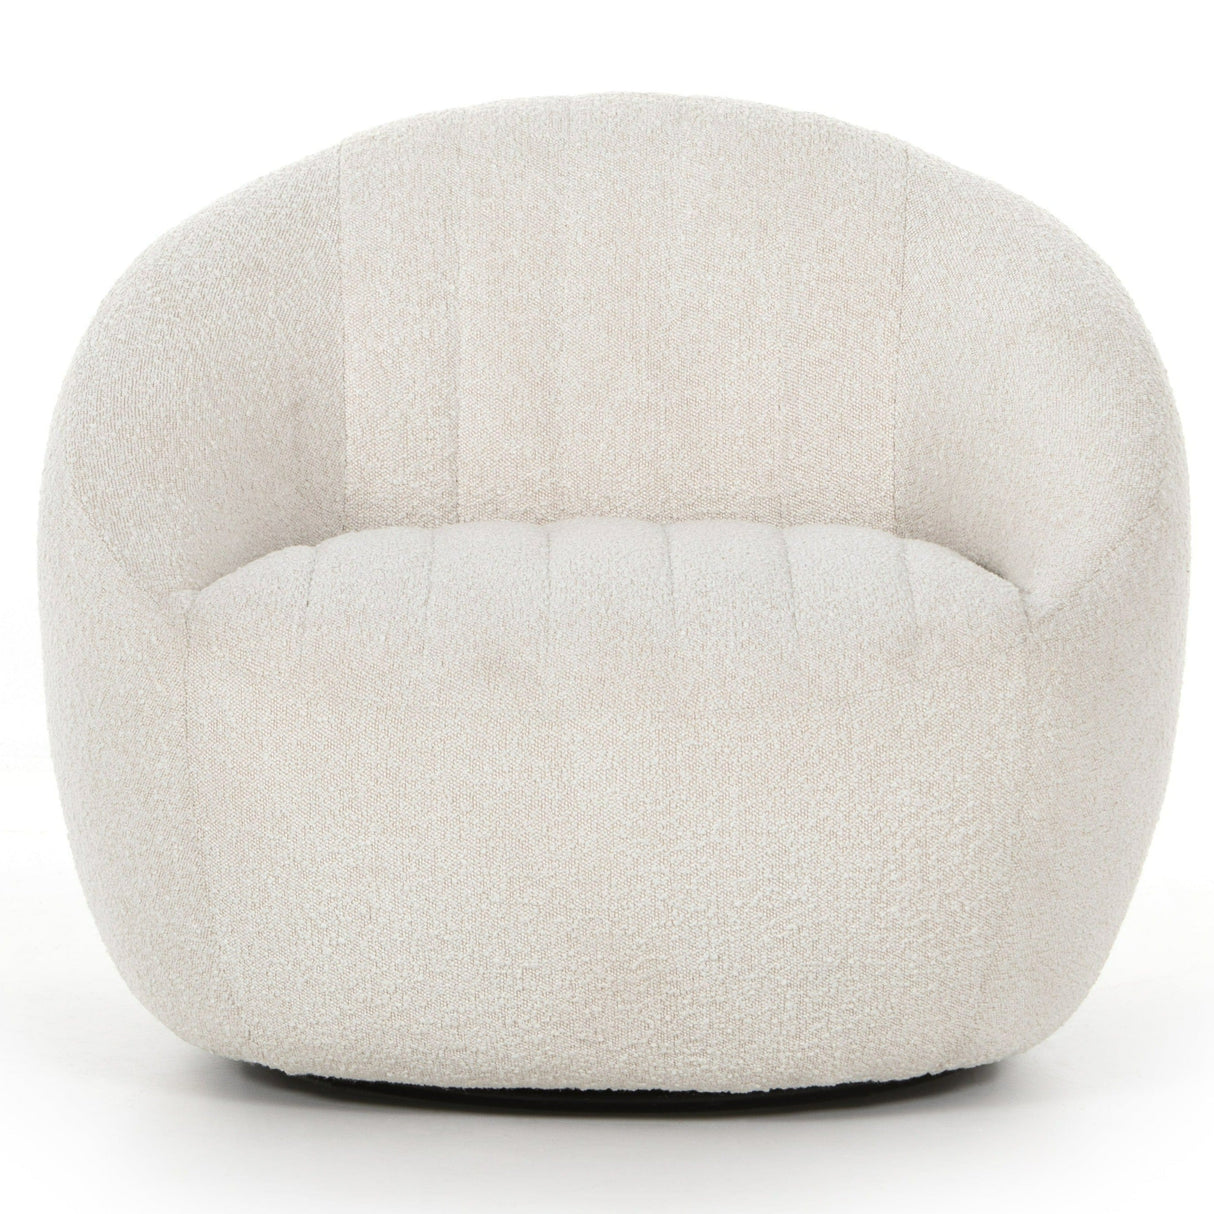 Four Hands Audie Swivel Chair in Performance Fabric Furniture four-hands-226408-003 801542716837